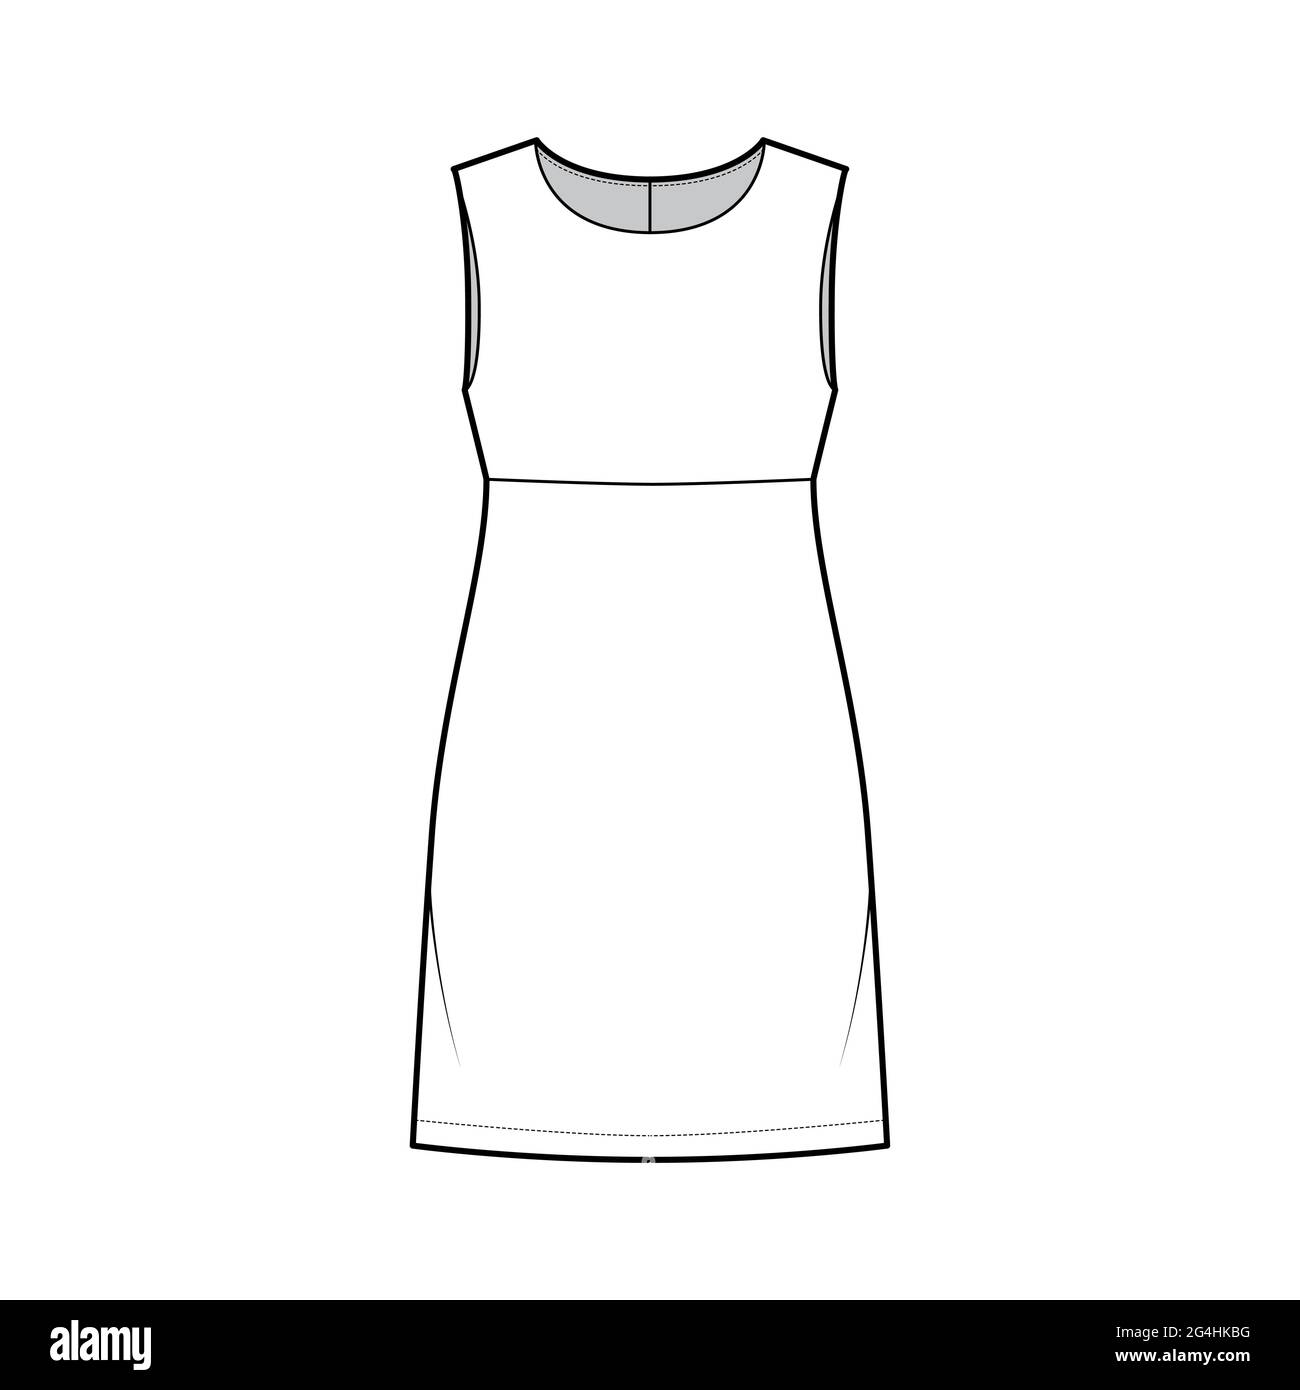 Dress empire line technical fashion illustration with sleeveless, oversized body, knee length A-line skirt. Flat apparel front, white color style. Wom Stock Vector